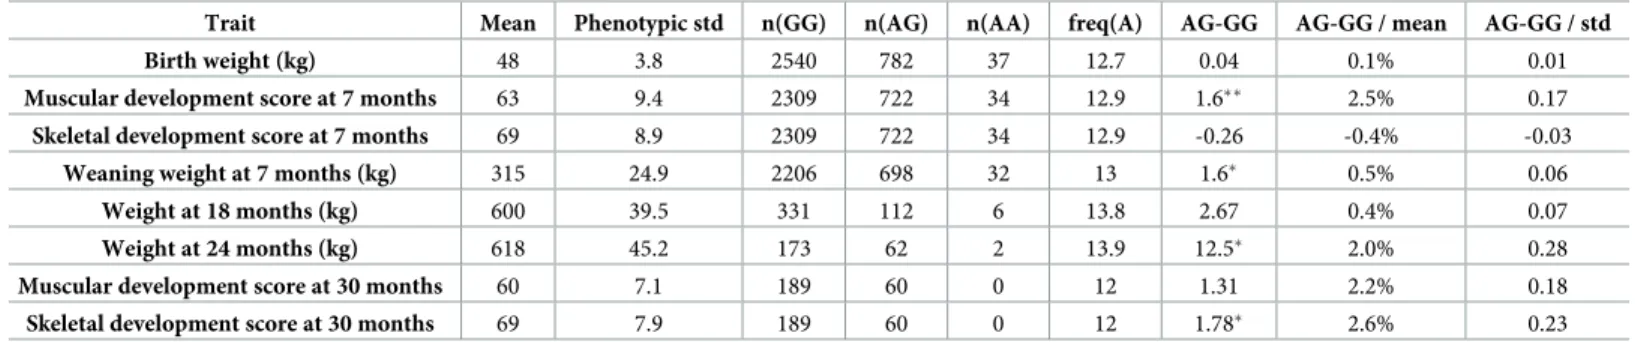 Table 3. Association between the ataxia variant and morphology traits in animals of the Charolais breed.